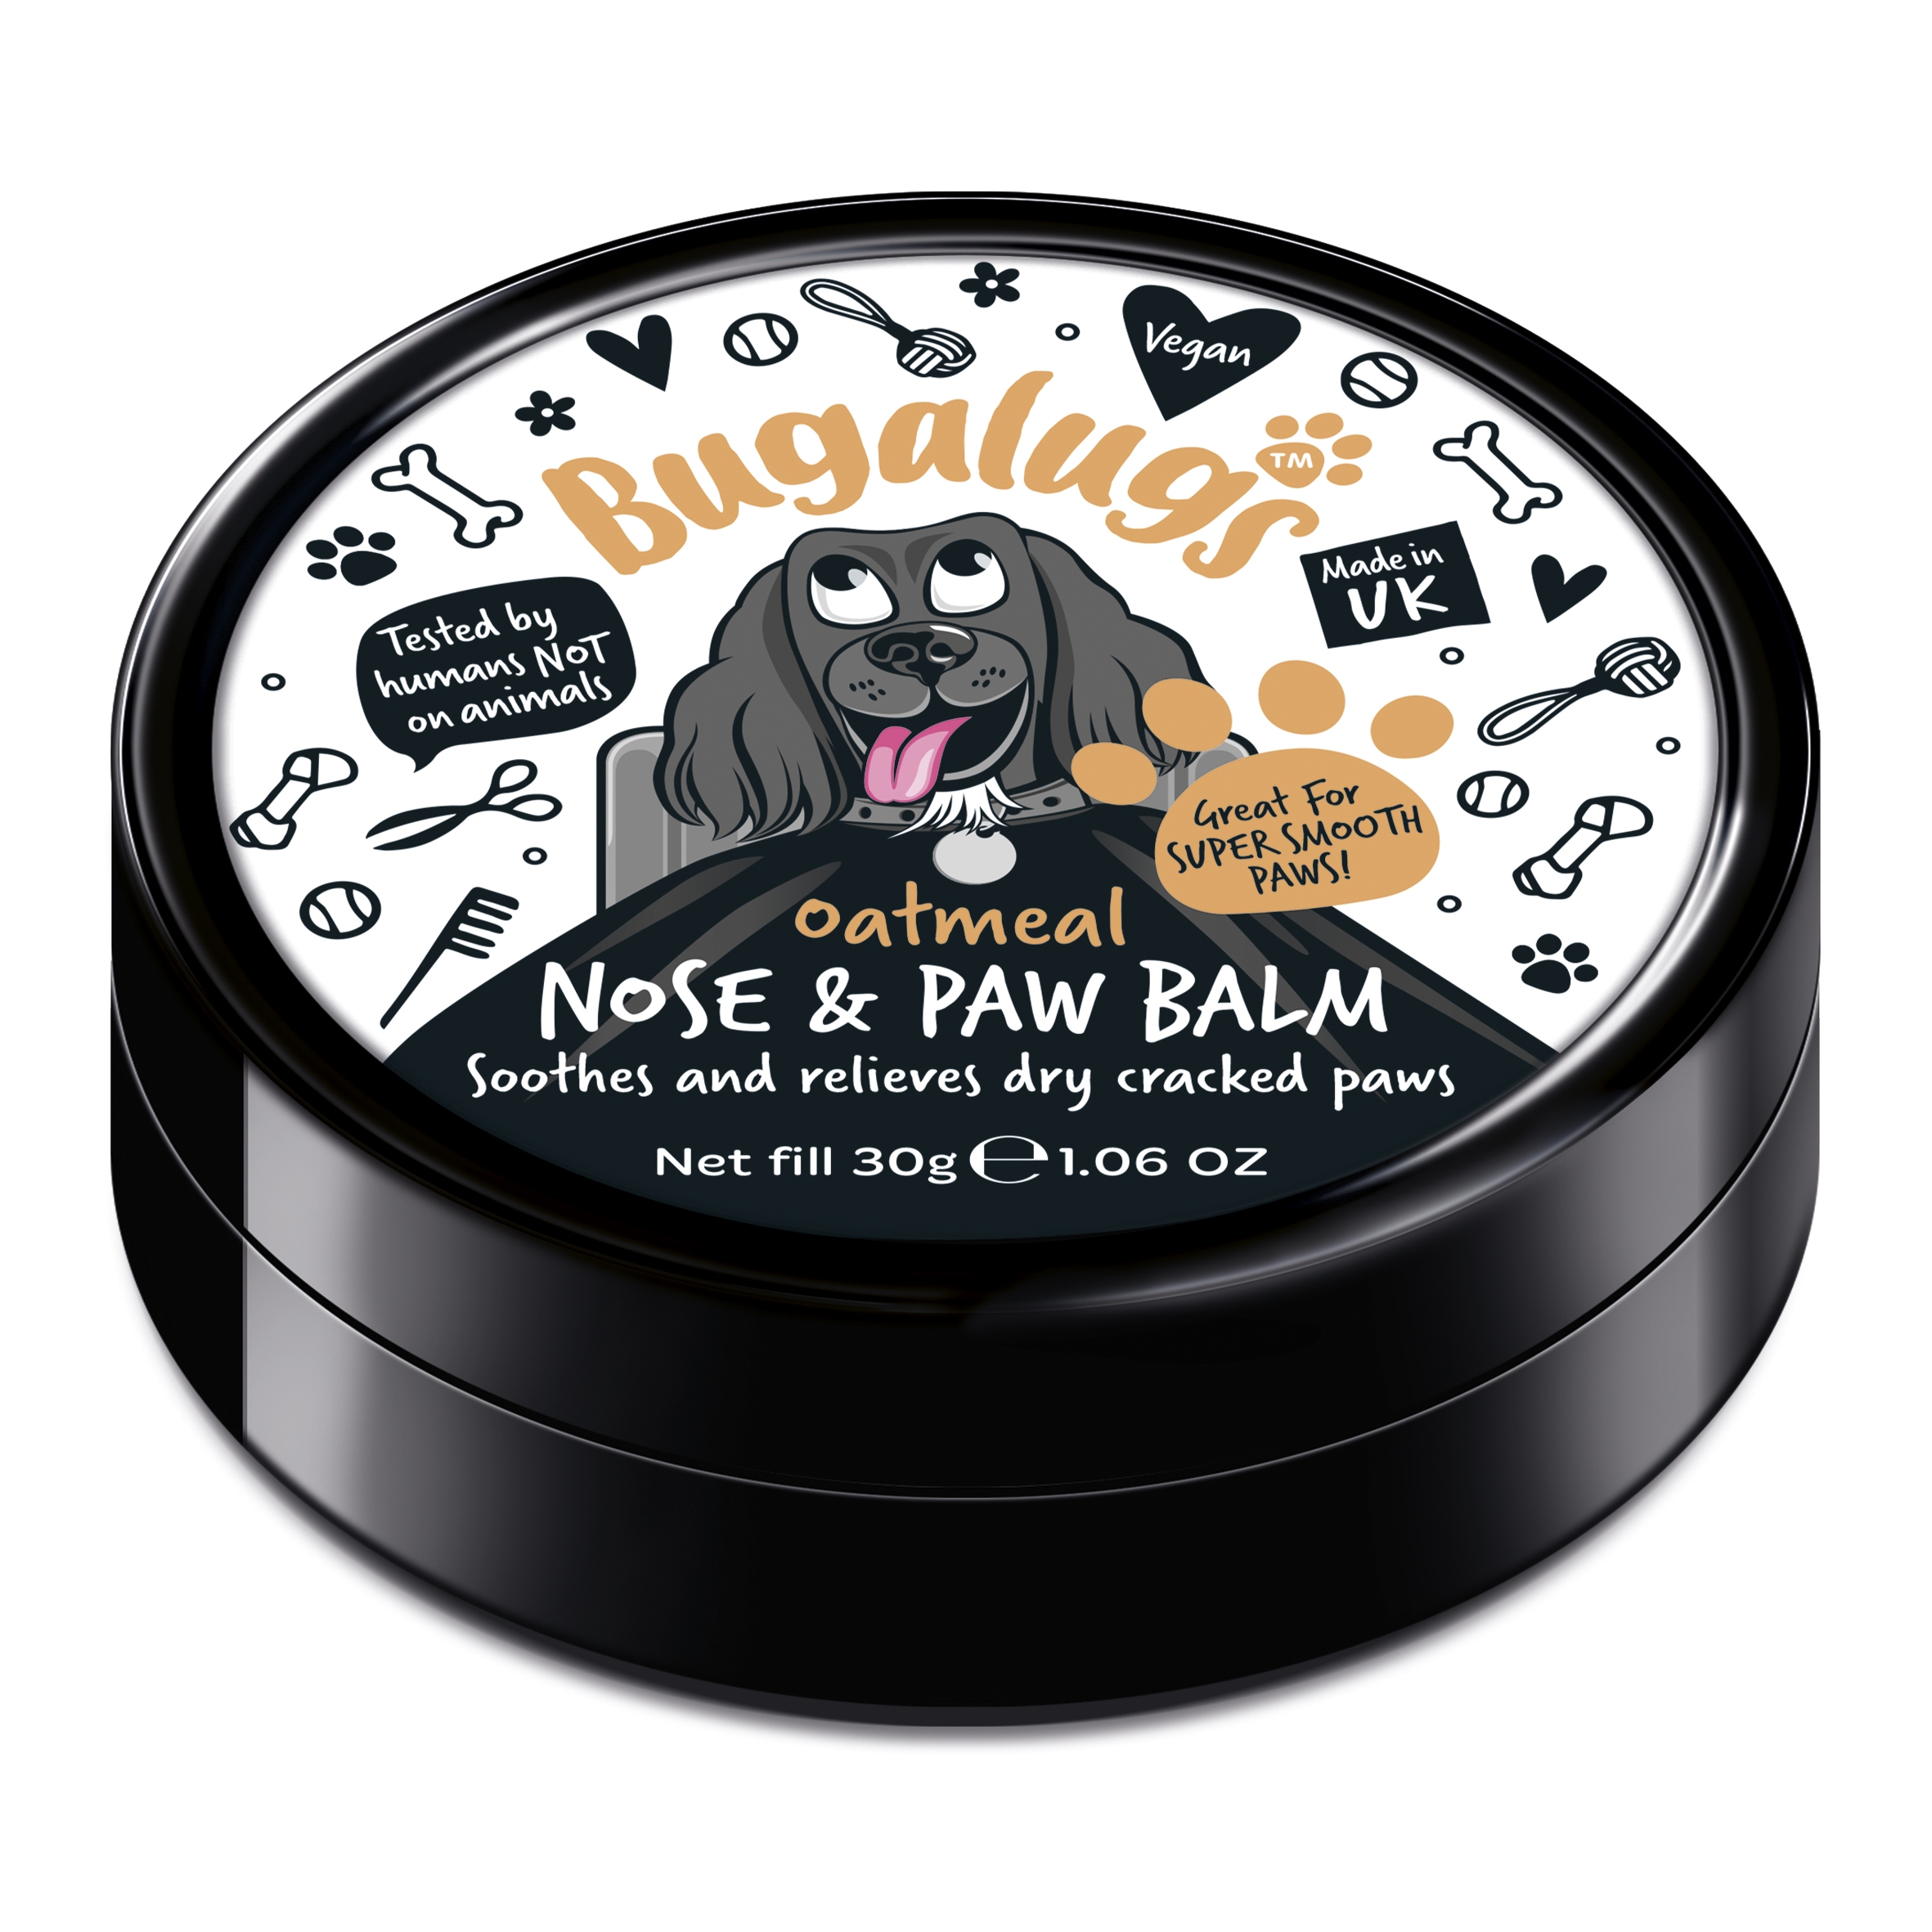 Bugalugs Nose & Paw Balm – Paws N Co